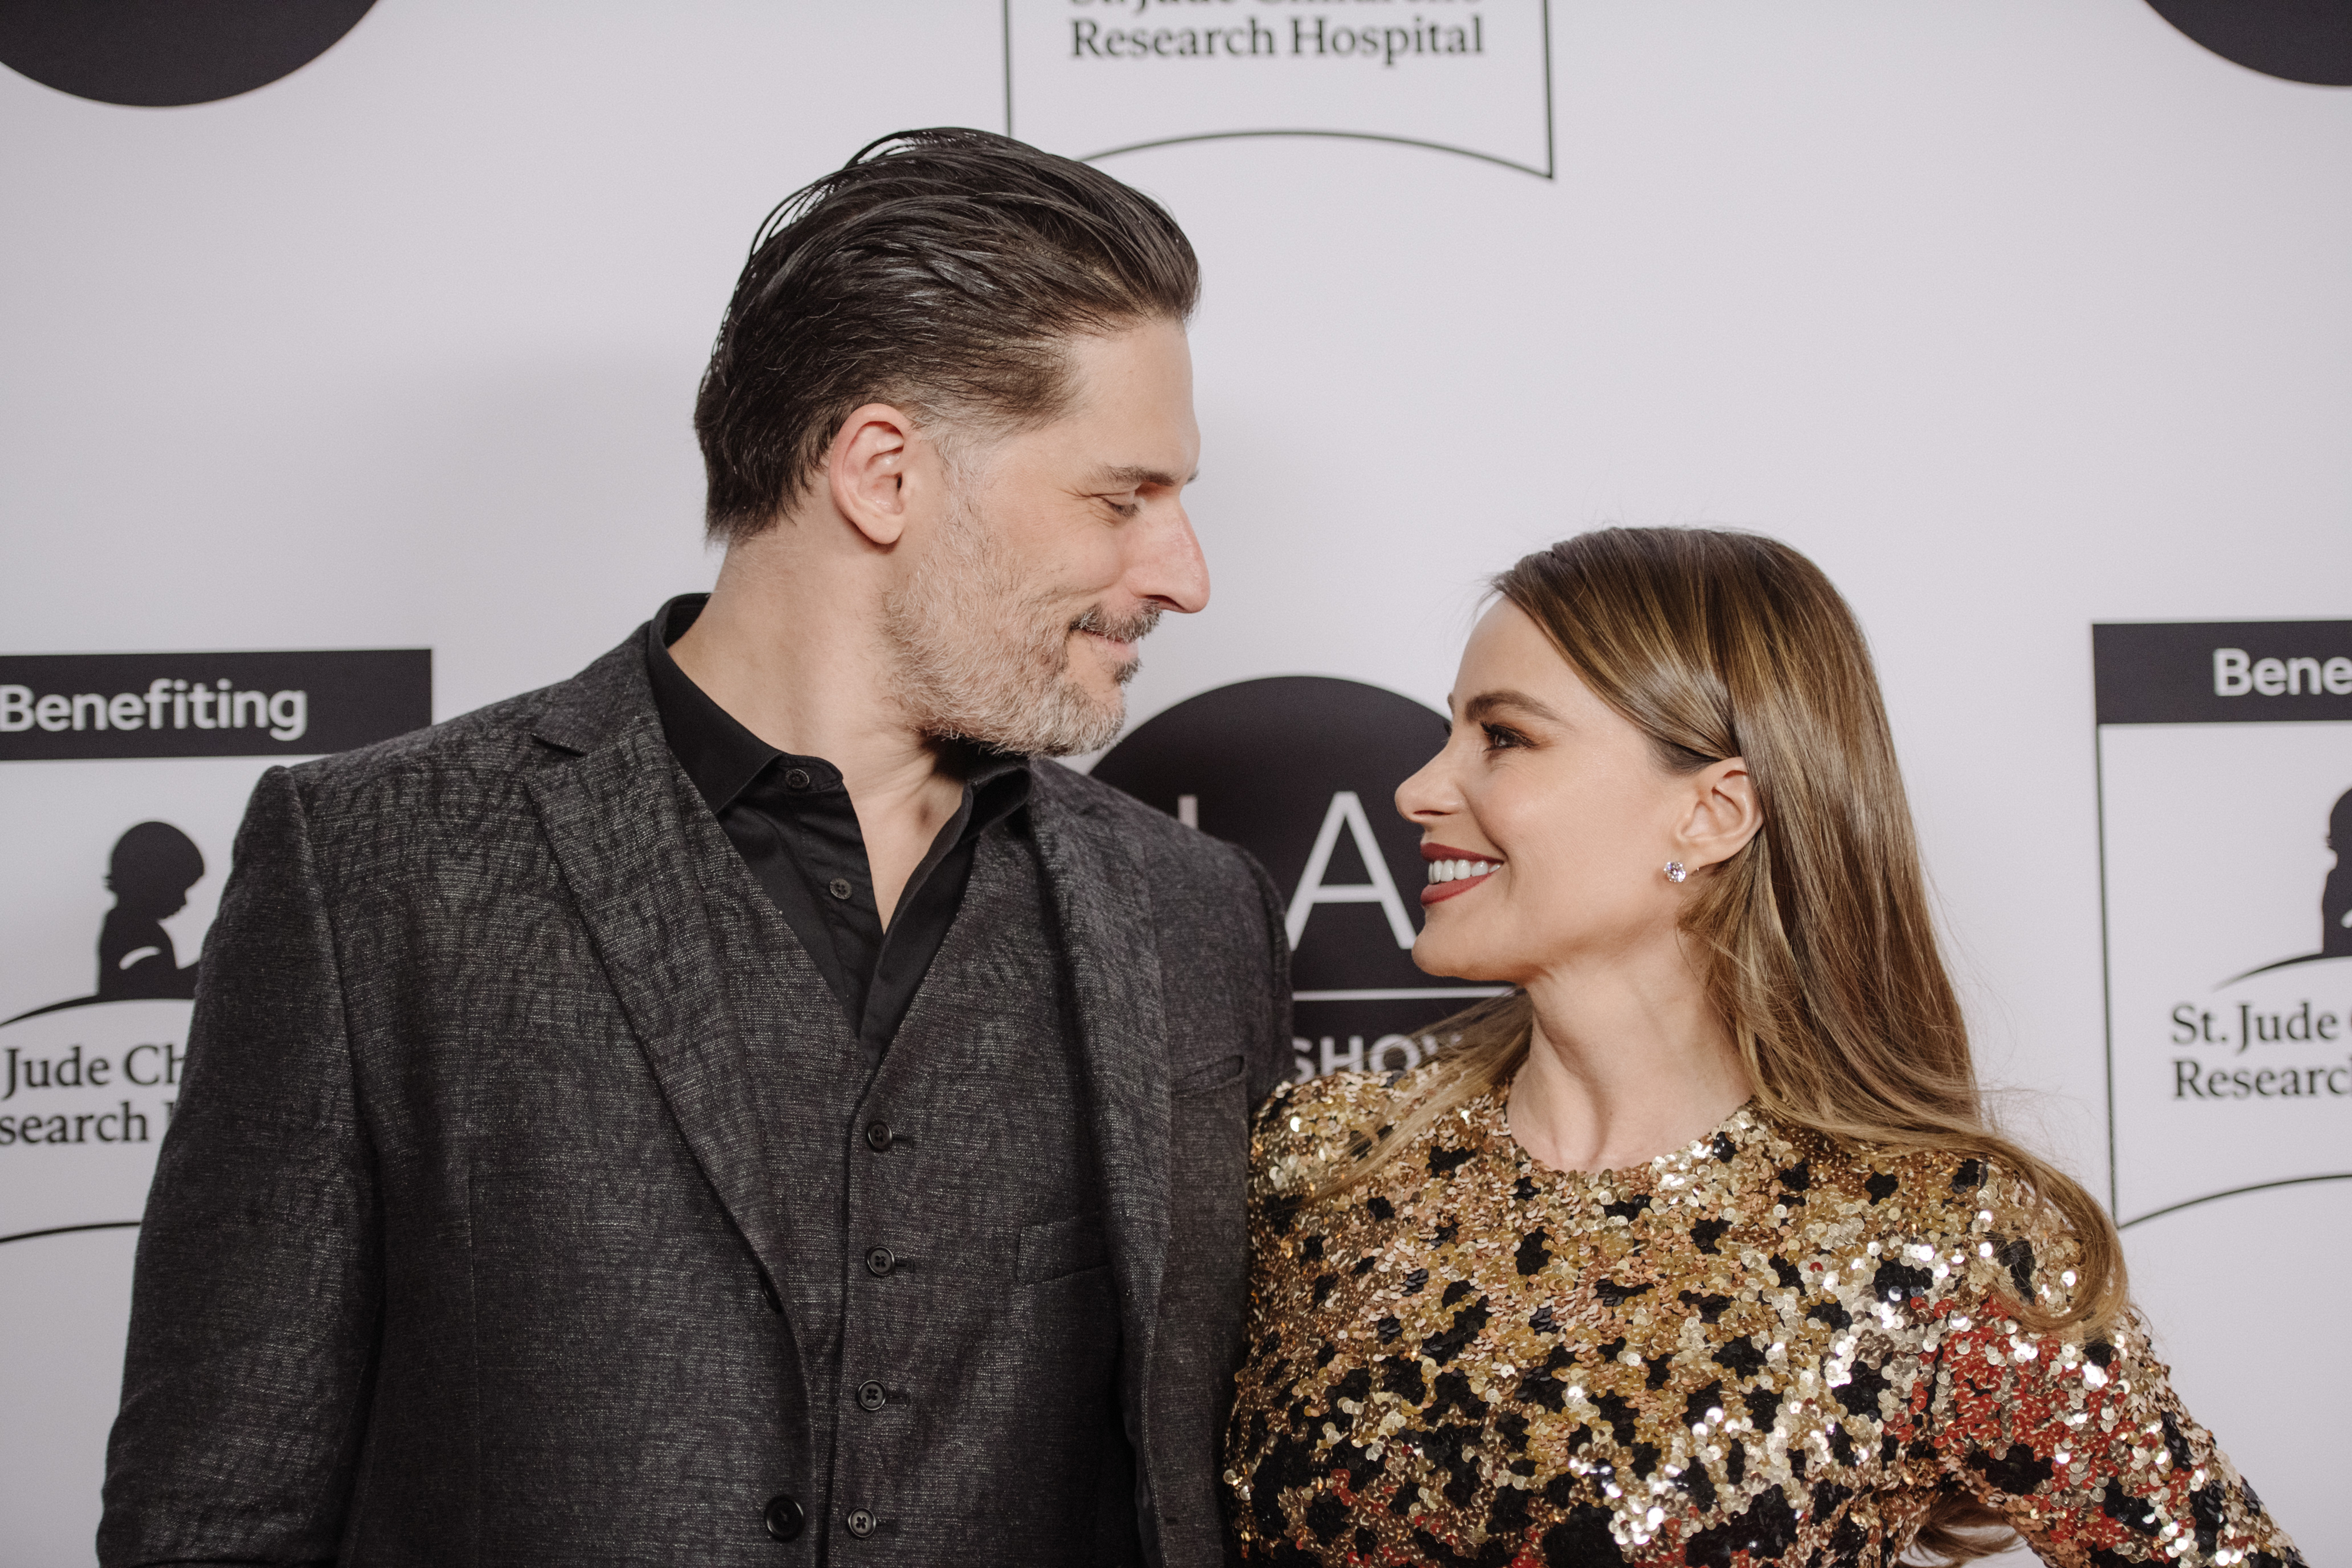 The former couple looking lovingly at one another as they stand on the red carpet